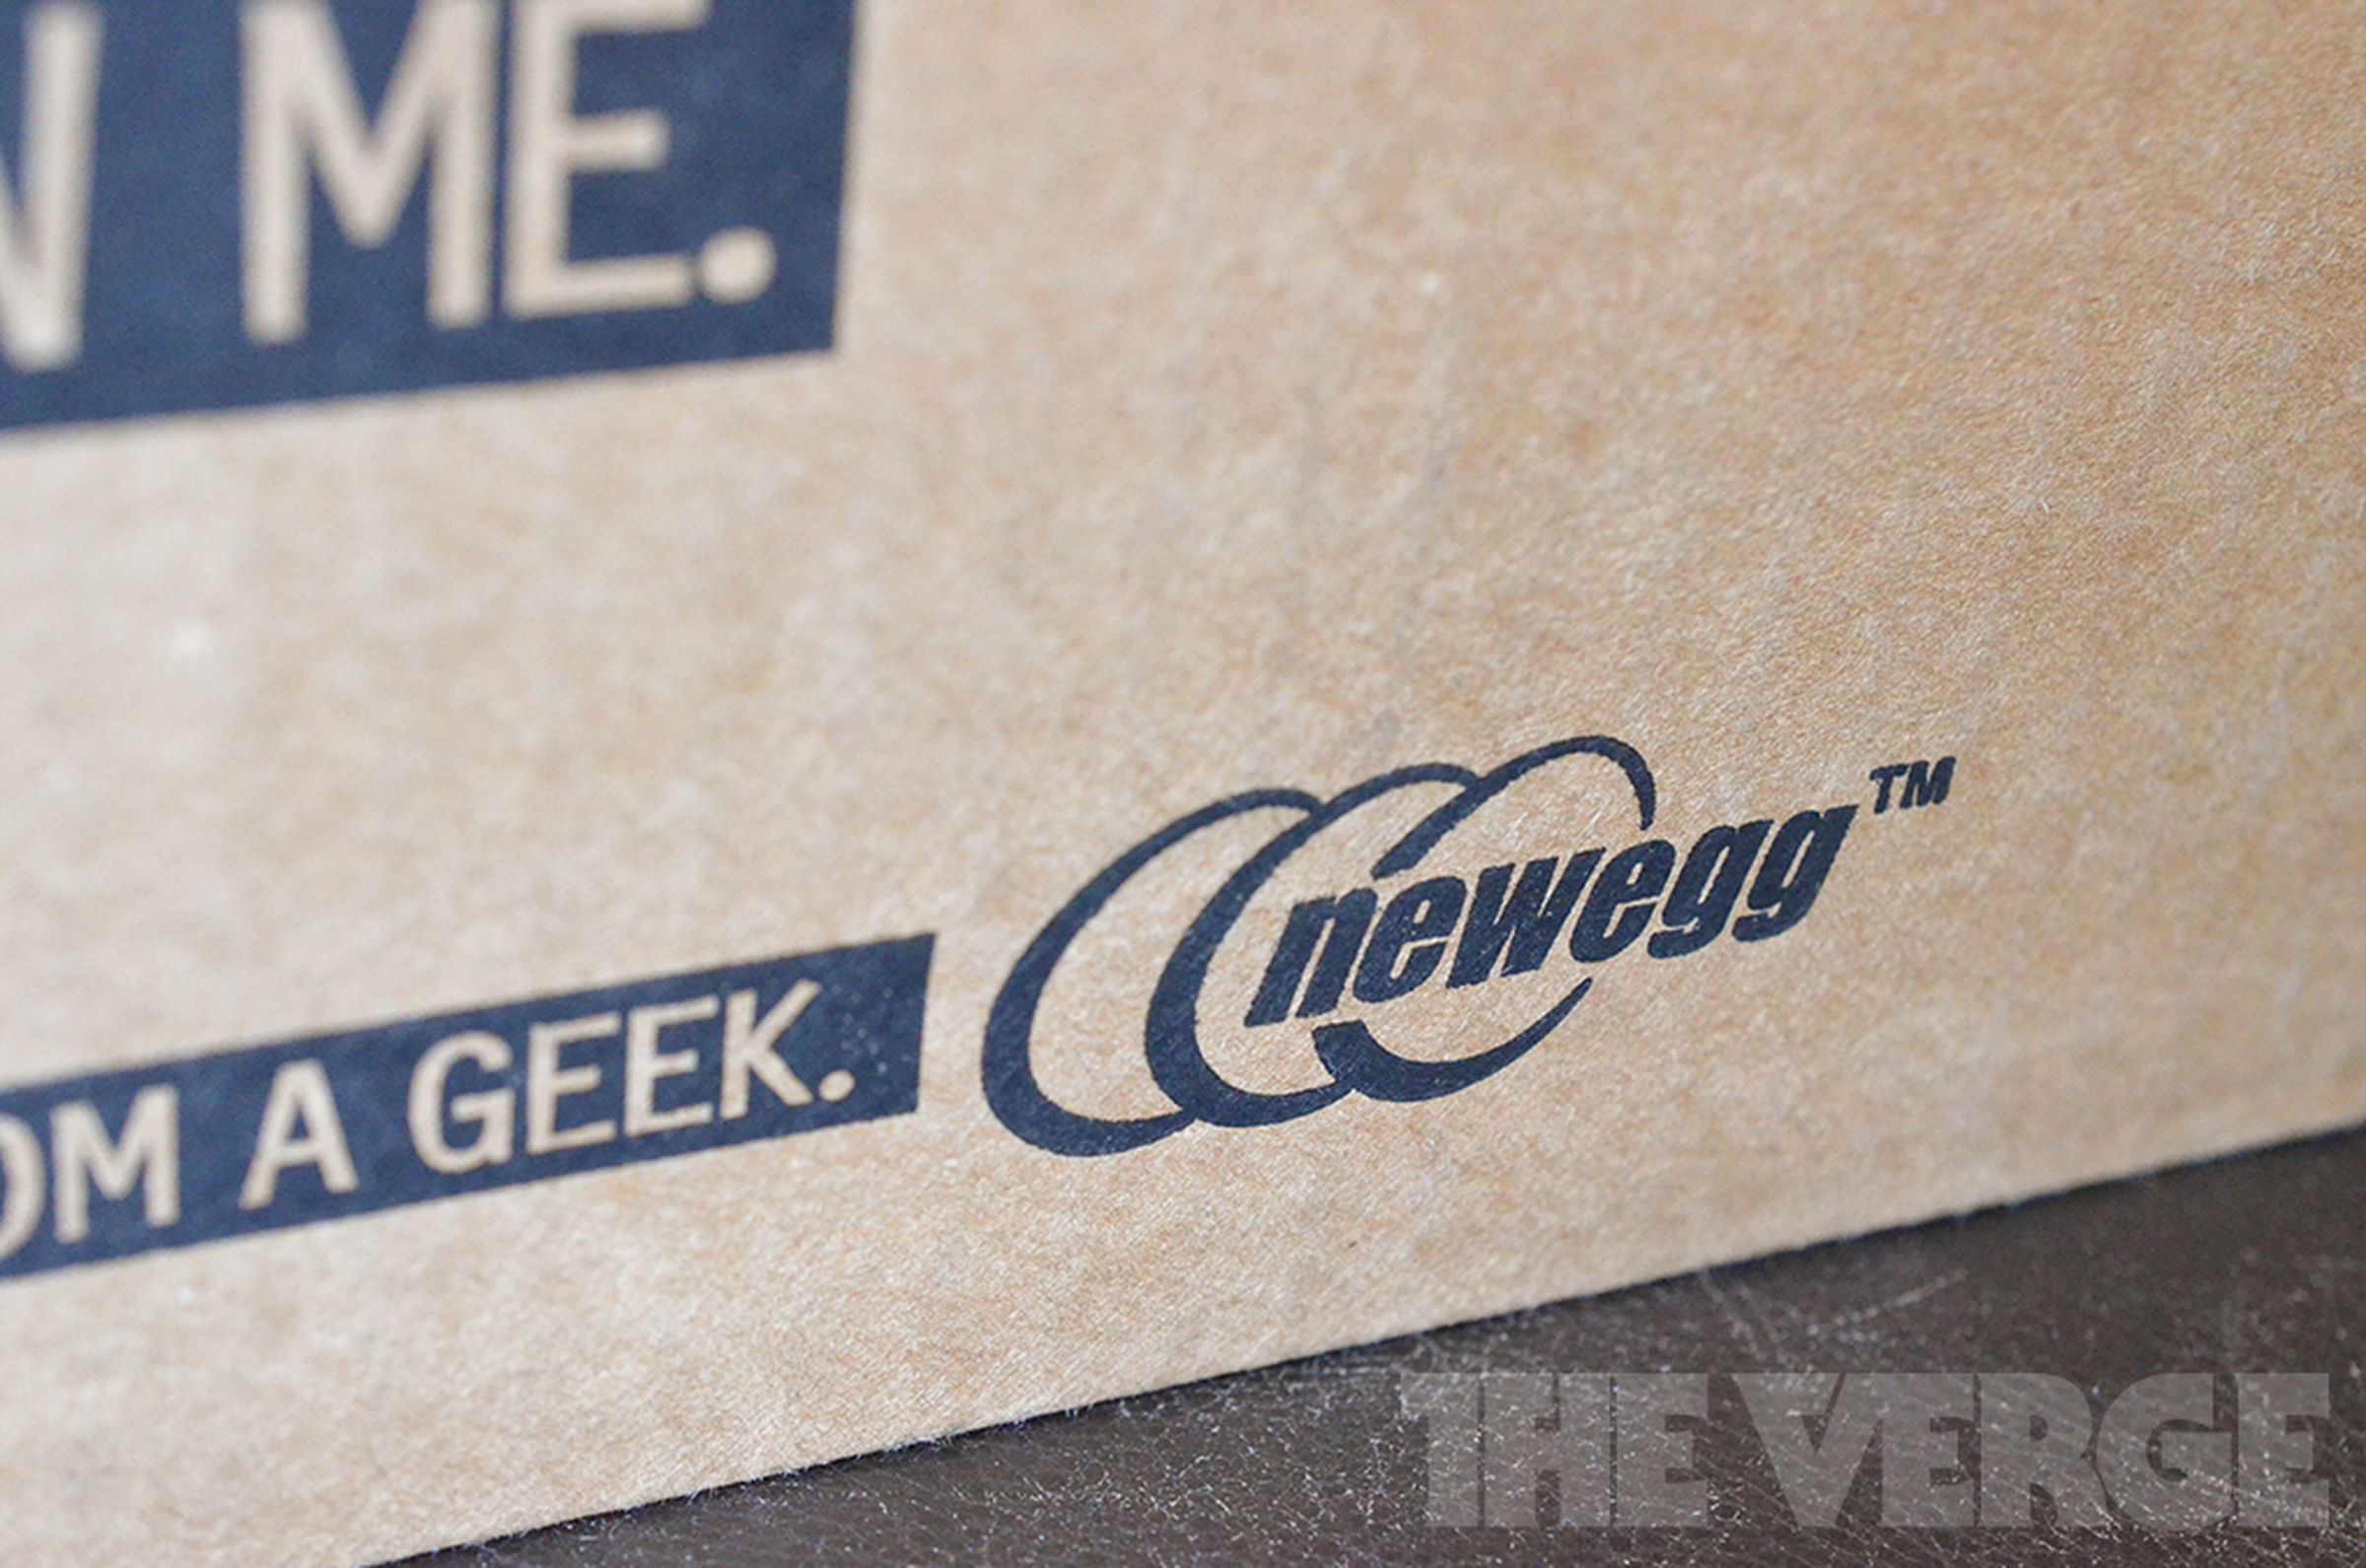 A photo of the Newegg logo on a brown box